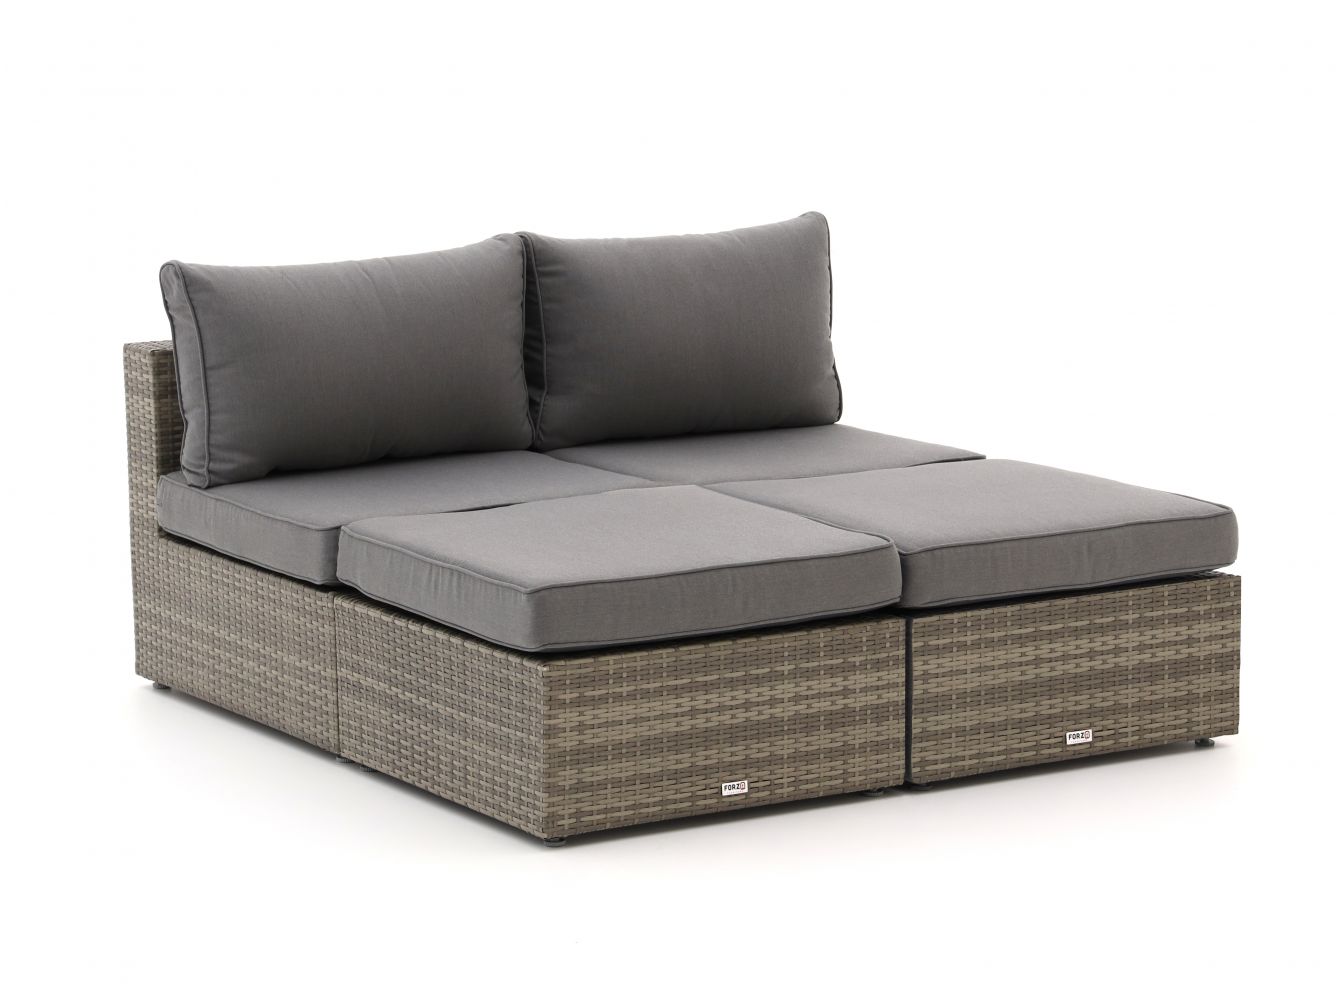 Forza Barolo lounge daybed 4 delig